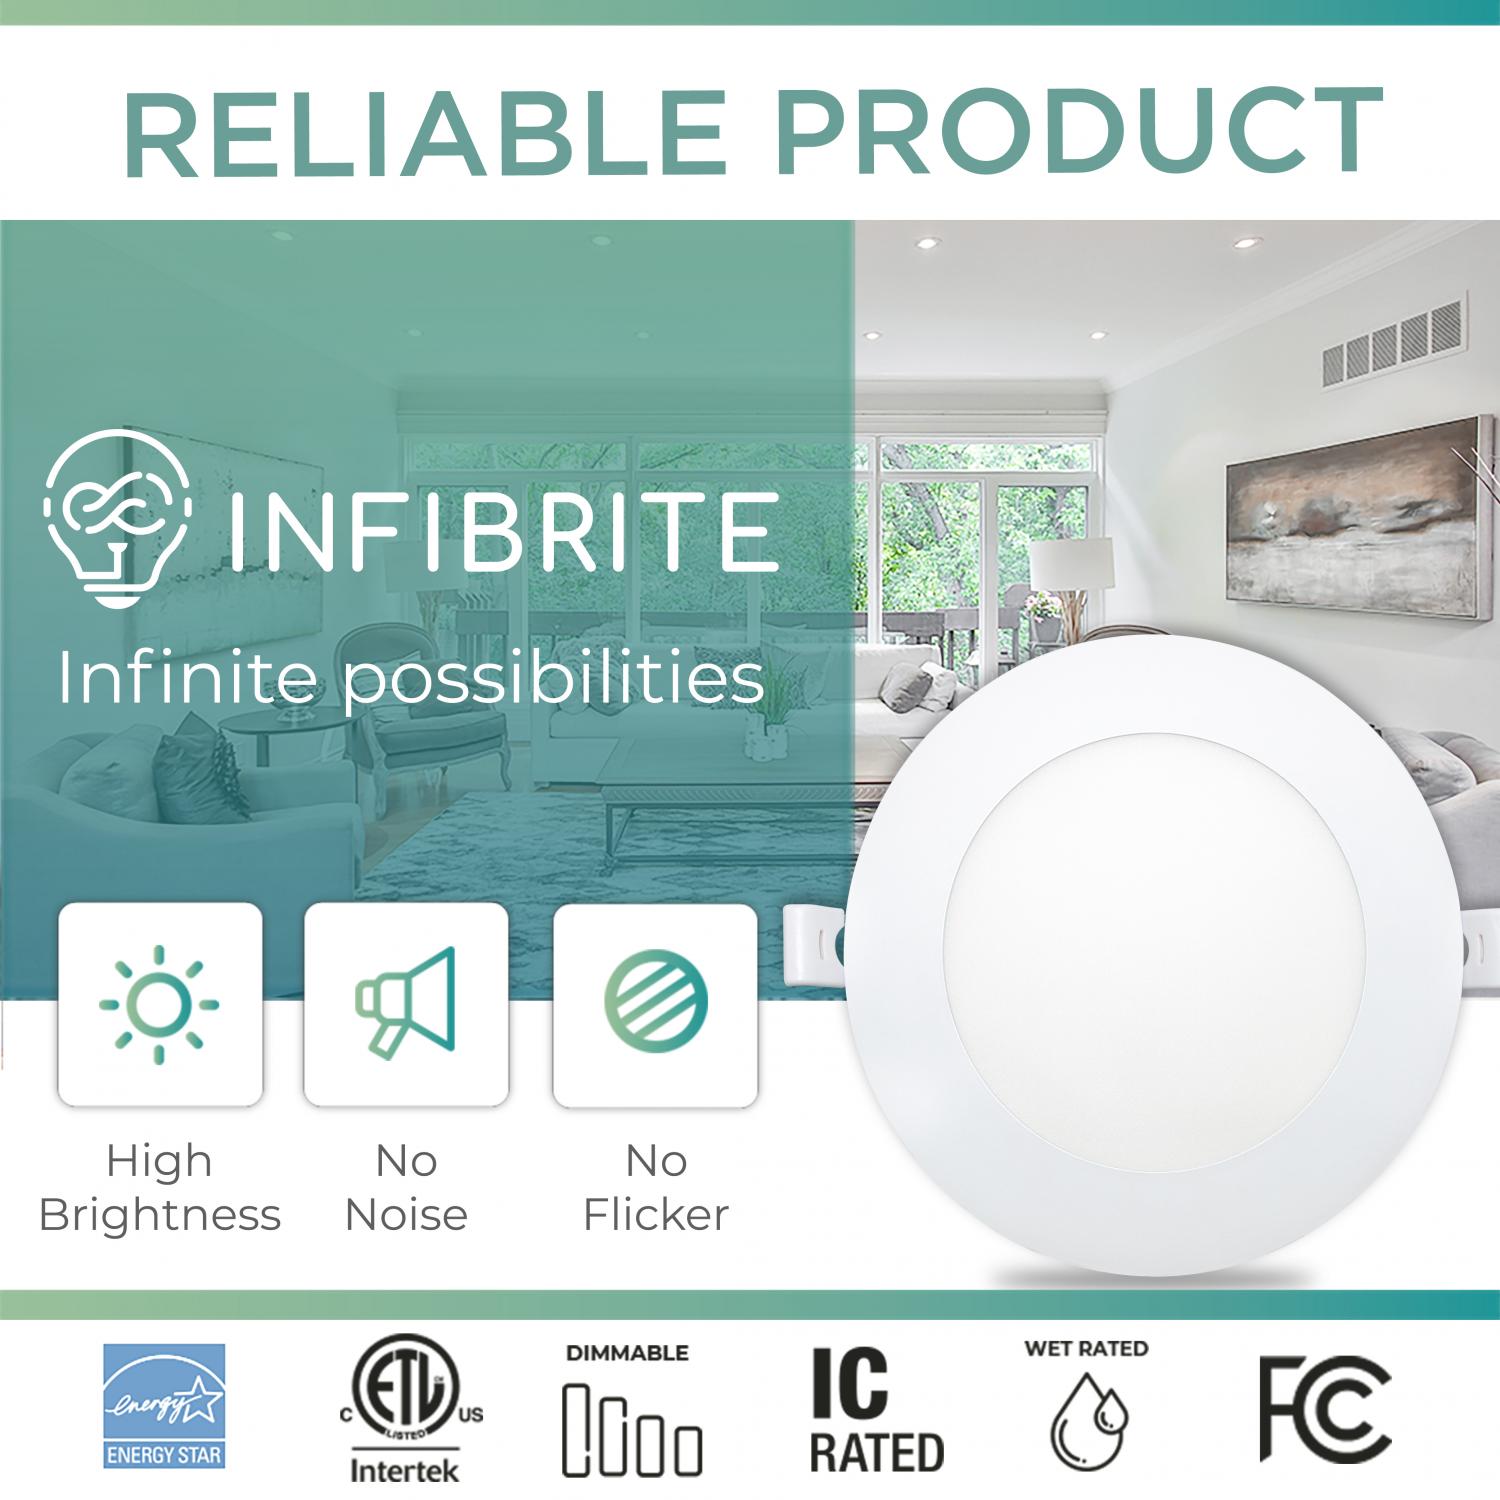 Infibrite 6 Inch 2700K Soft White 12W 1050LM Ultra-Slim LED Ceiling Light with Junction Box, Flush Mount, Dimmable, Fixture for Bedroom, Wet Rated for Bathroom, Easy Install, 110W Eqv, ETL & Energy Star, US Company (12 Pack)